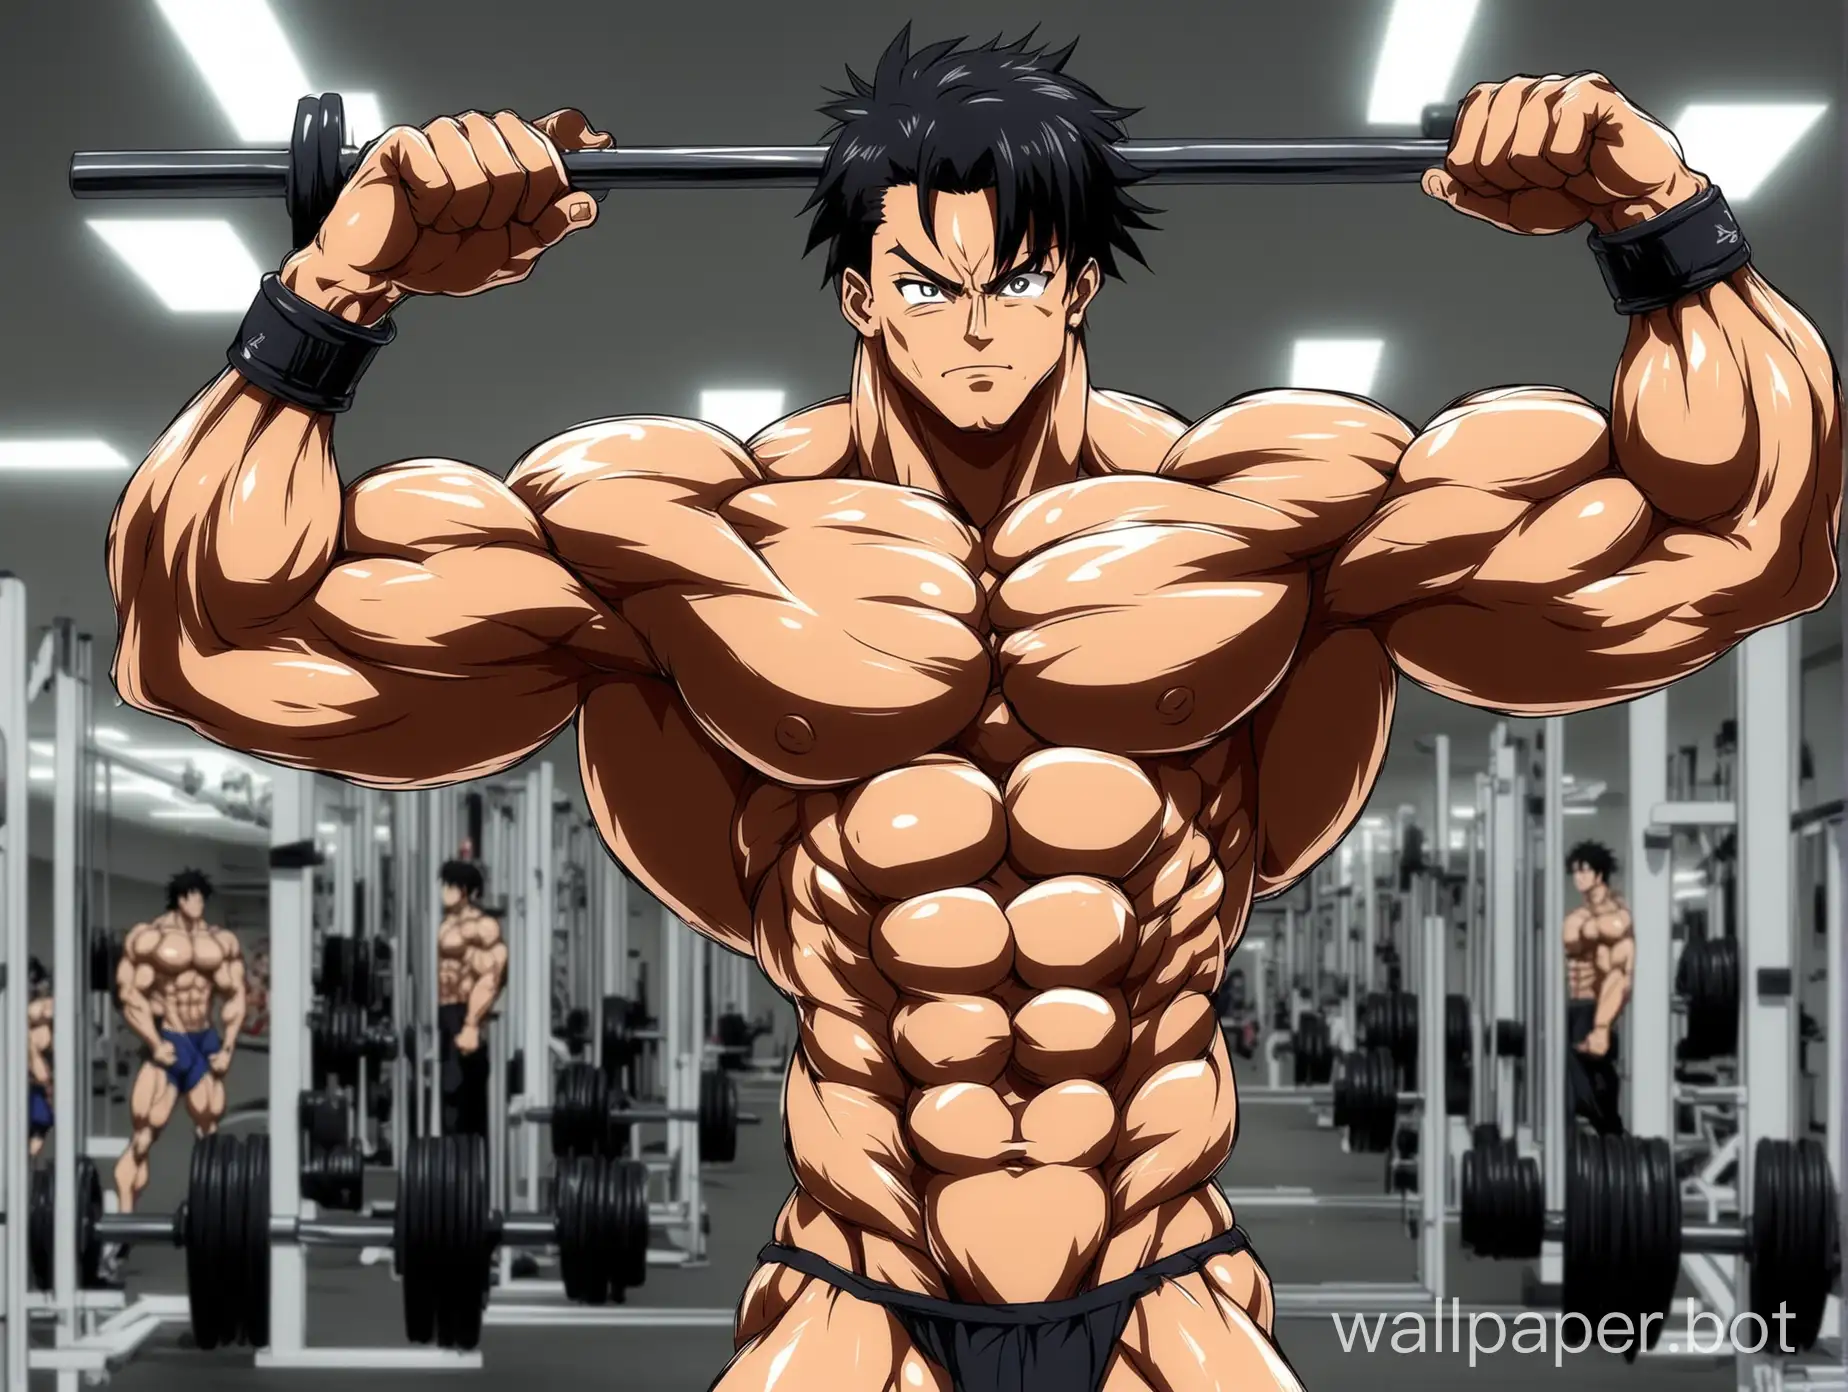 Dynamic-Anime-Bodybuilding-Illustration-Muscular-Figures-in-Action